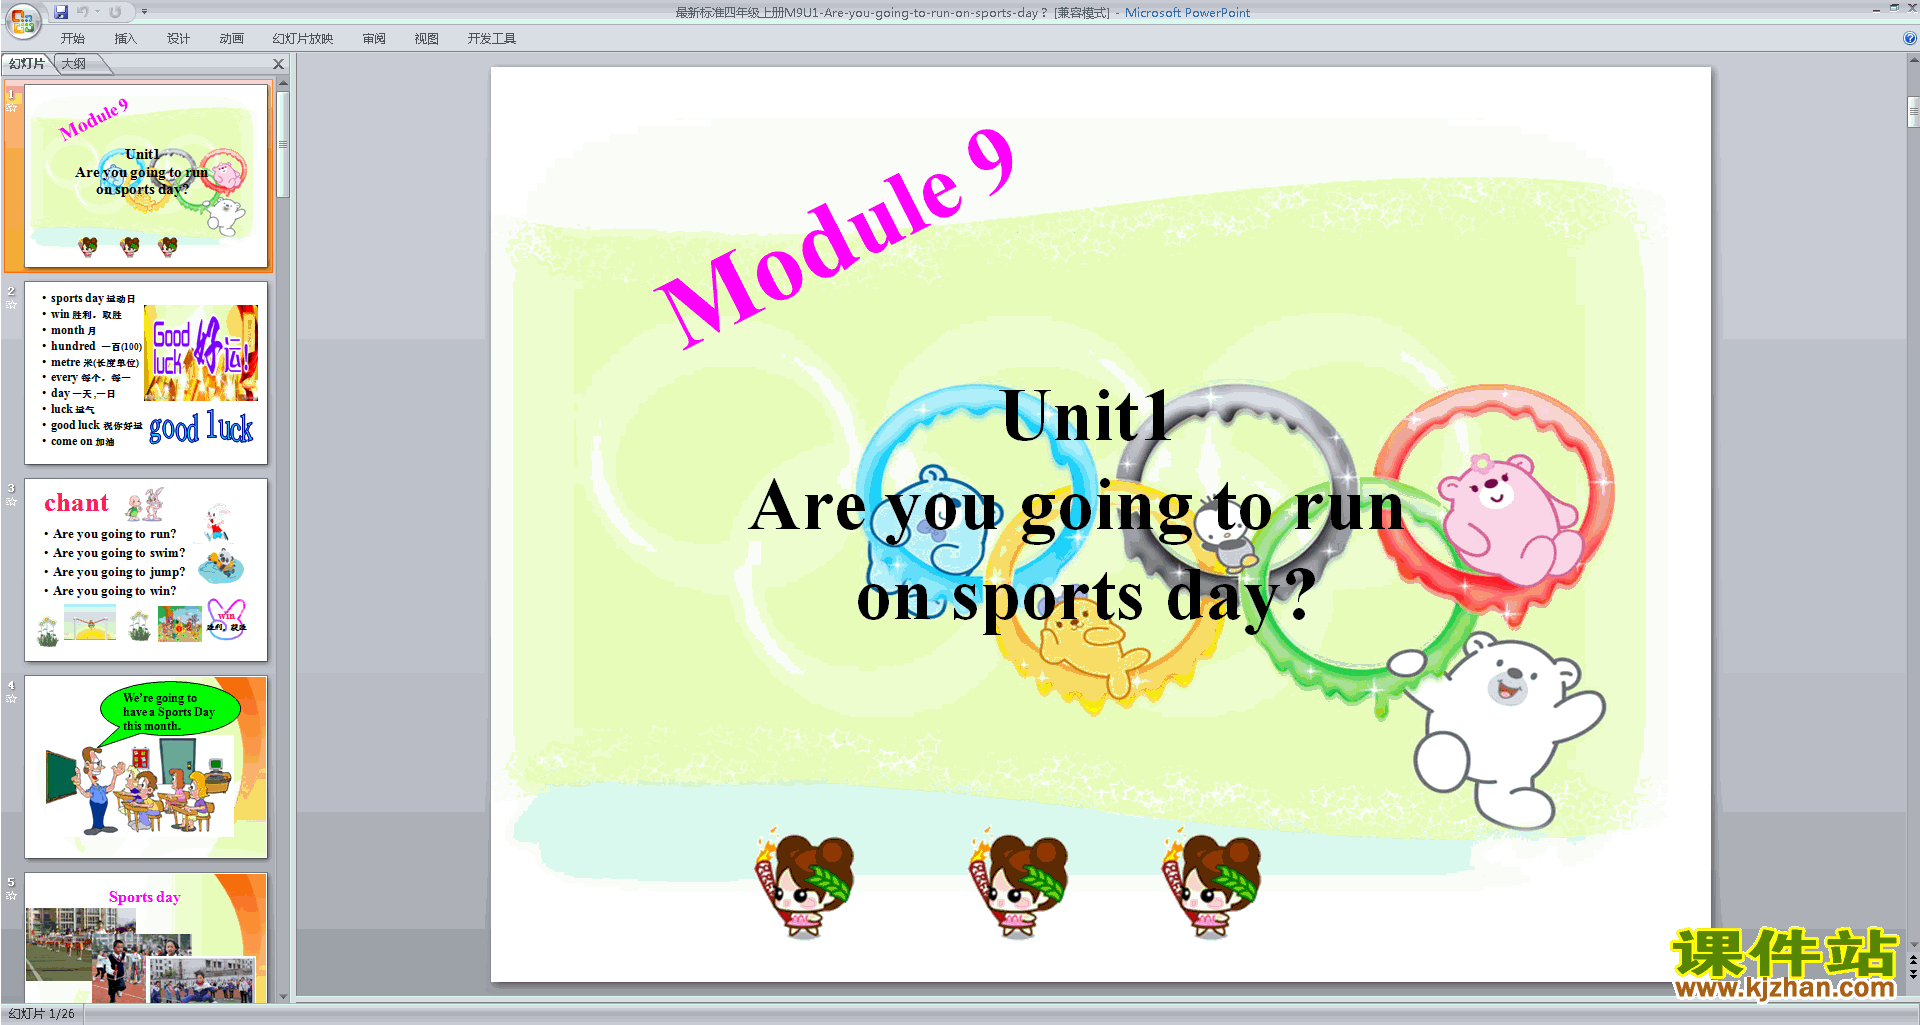 Module9 Unit1 Are you going to run on sports daypptμ2